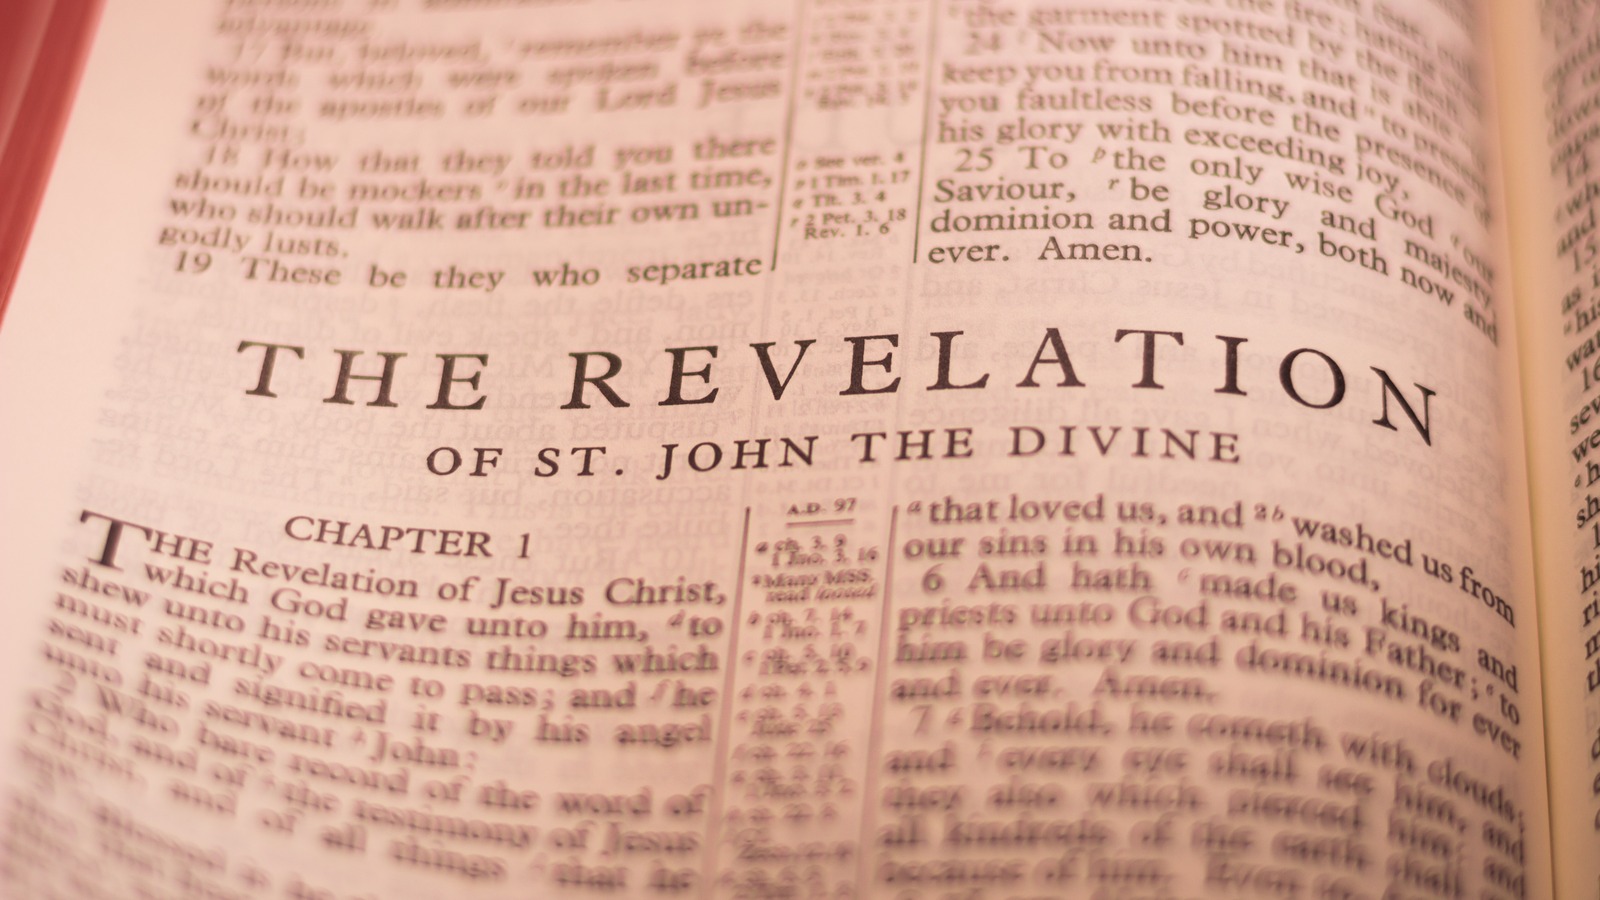 Writing & Revealing His Glory: The Story Behind Revelation Song